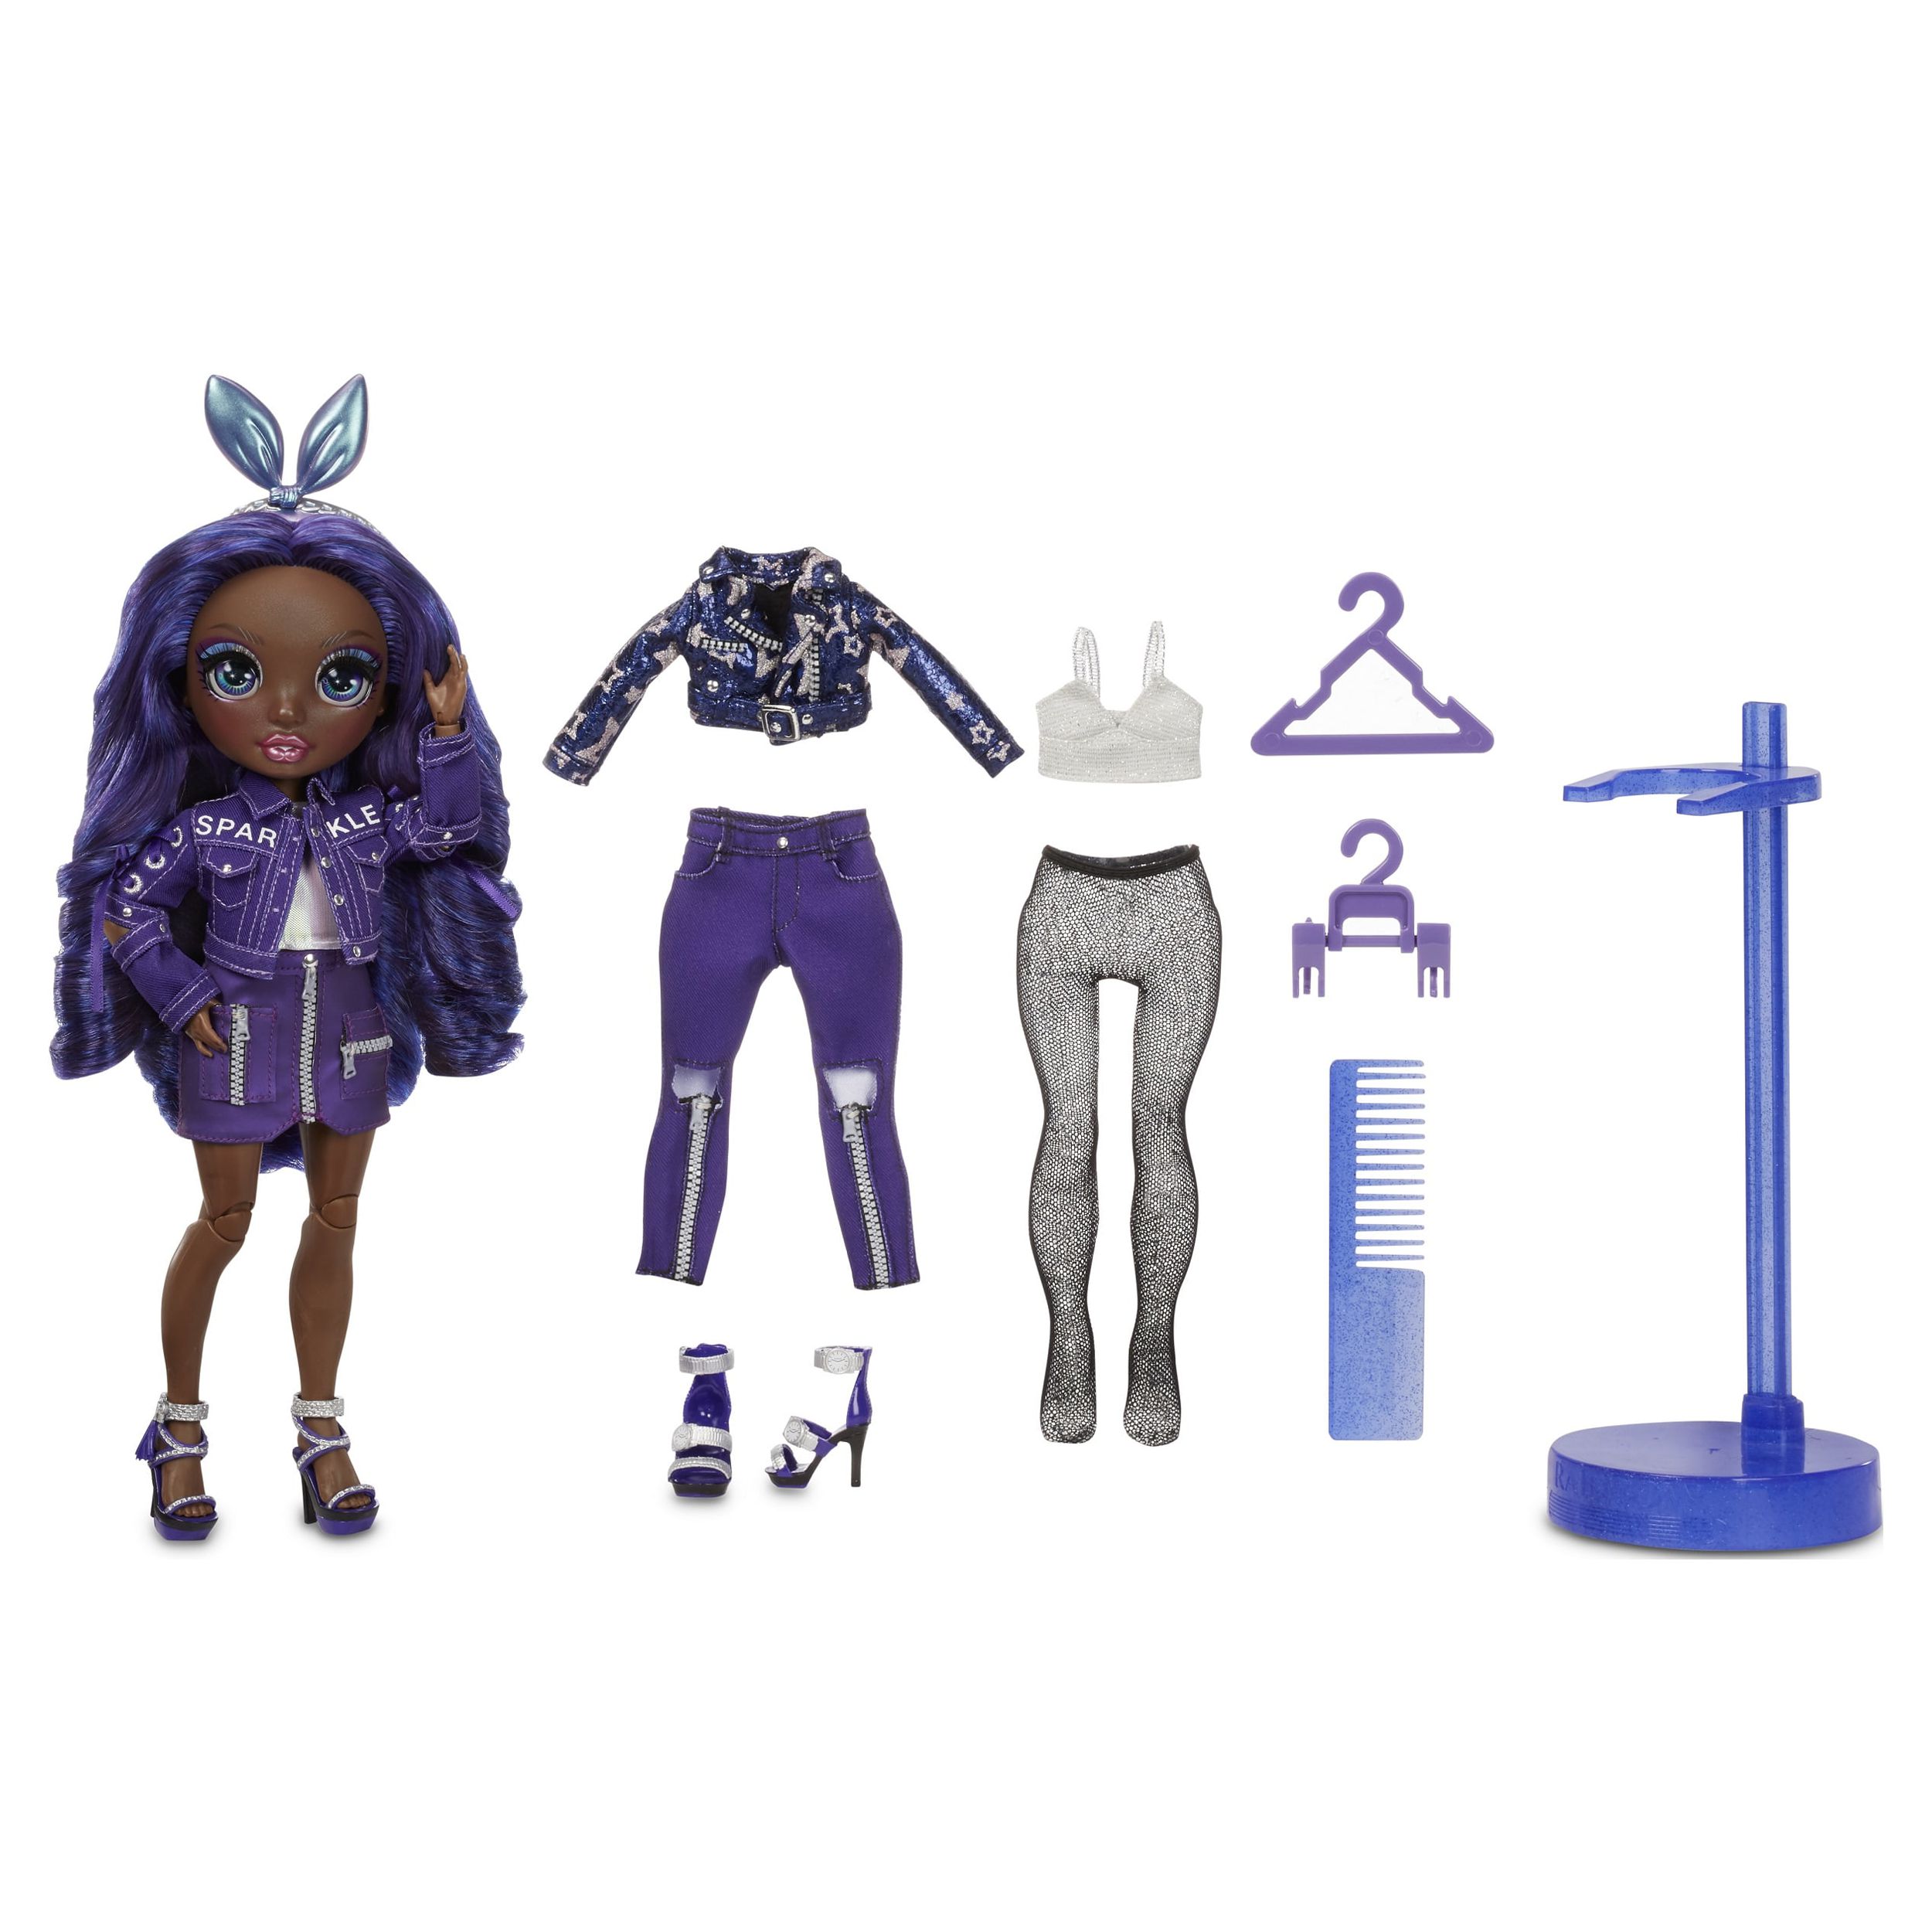 Rainbow High Krystal Bailey – Indigo (Dark Blue Purple) Fashion Doll With 2 Complete Mix & Match Outfits And Accessories, Toys for Kids 6-12 Years Old - image 4 of 8